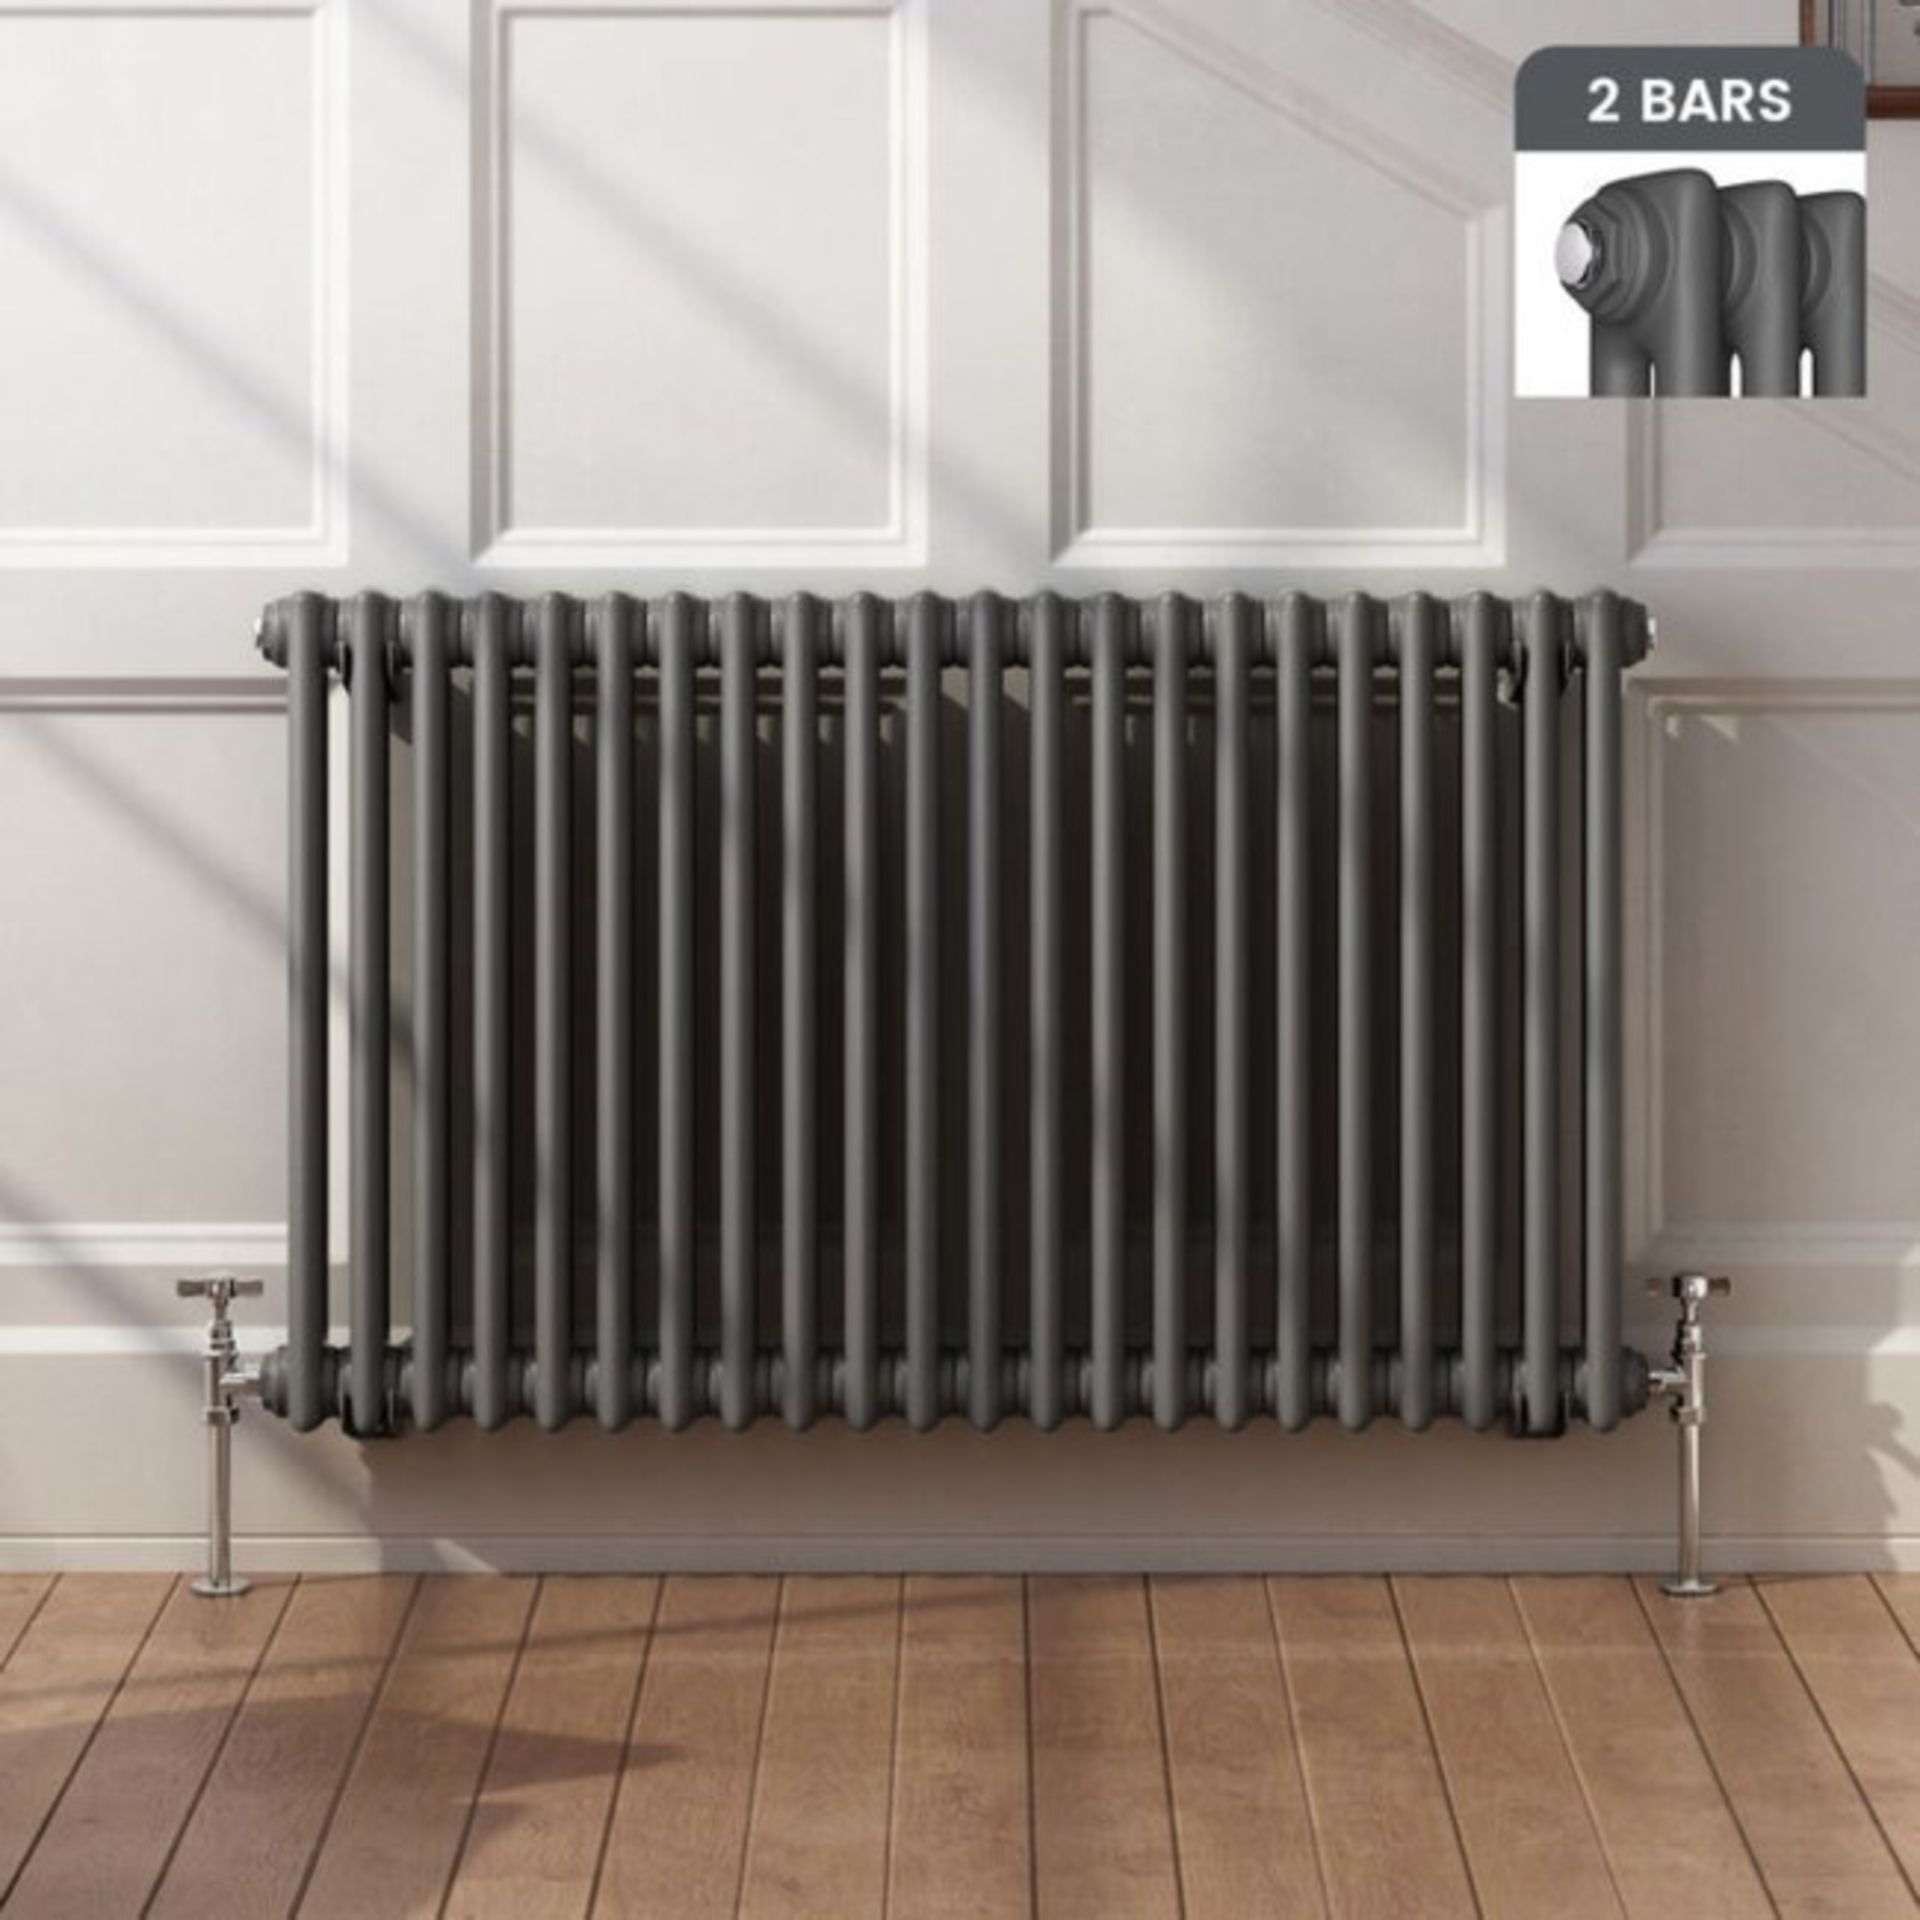 NEW & BOXED 600x1008mm Anthracite Double Panel Horizontal Colosseum Traditional Radiator. RRP ...